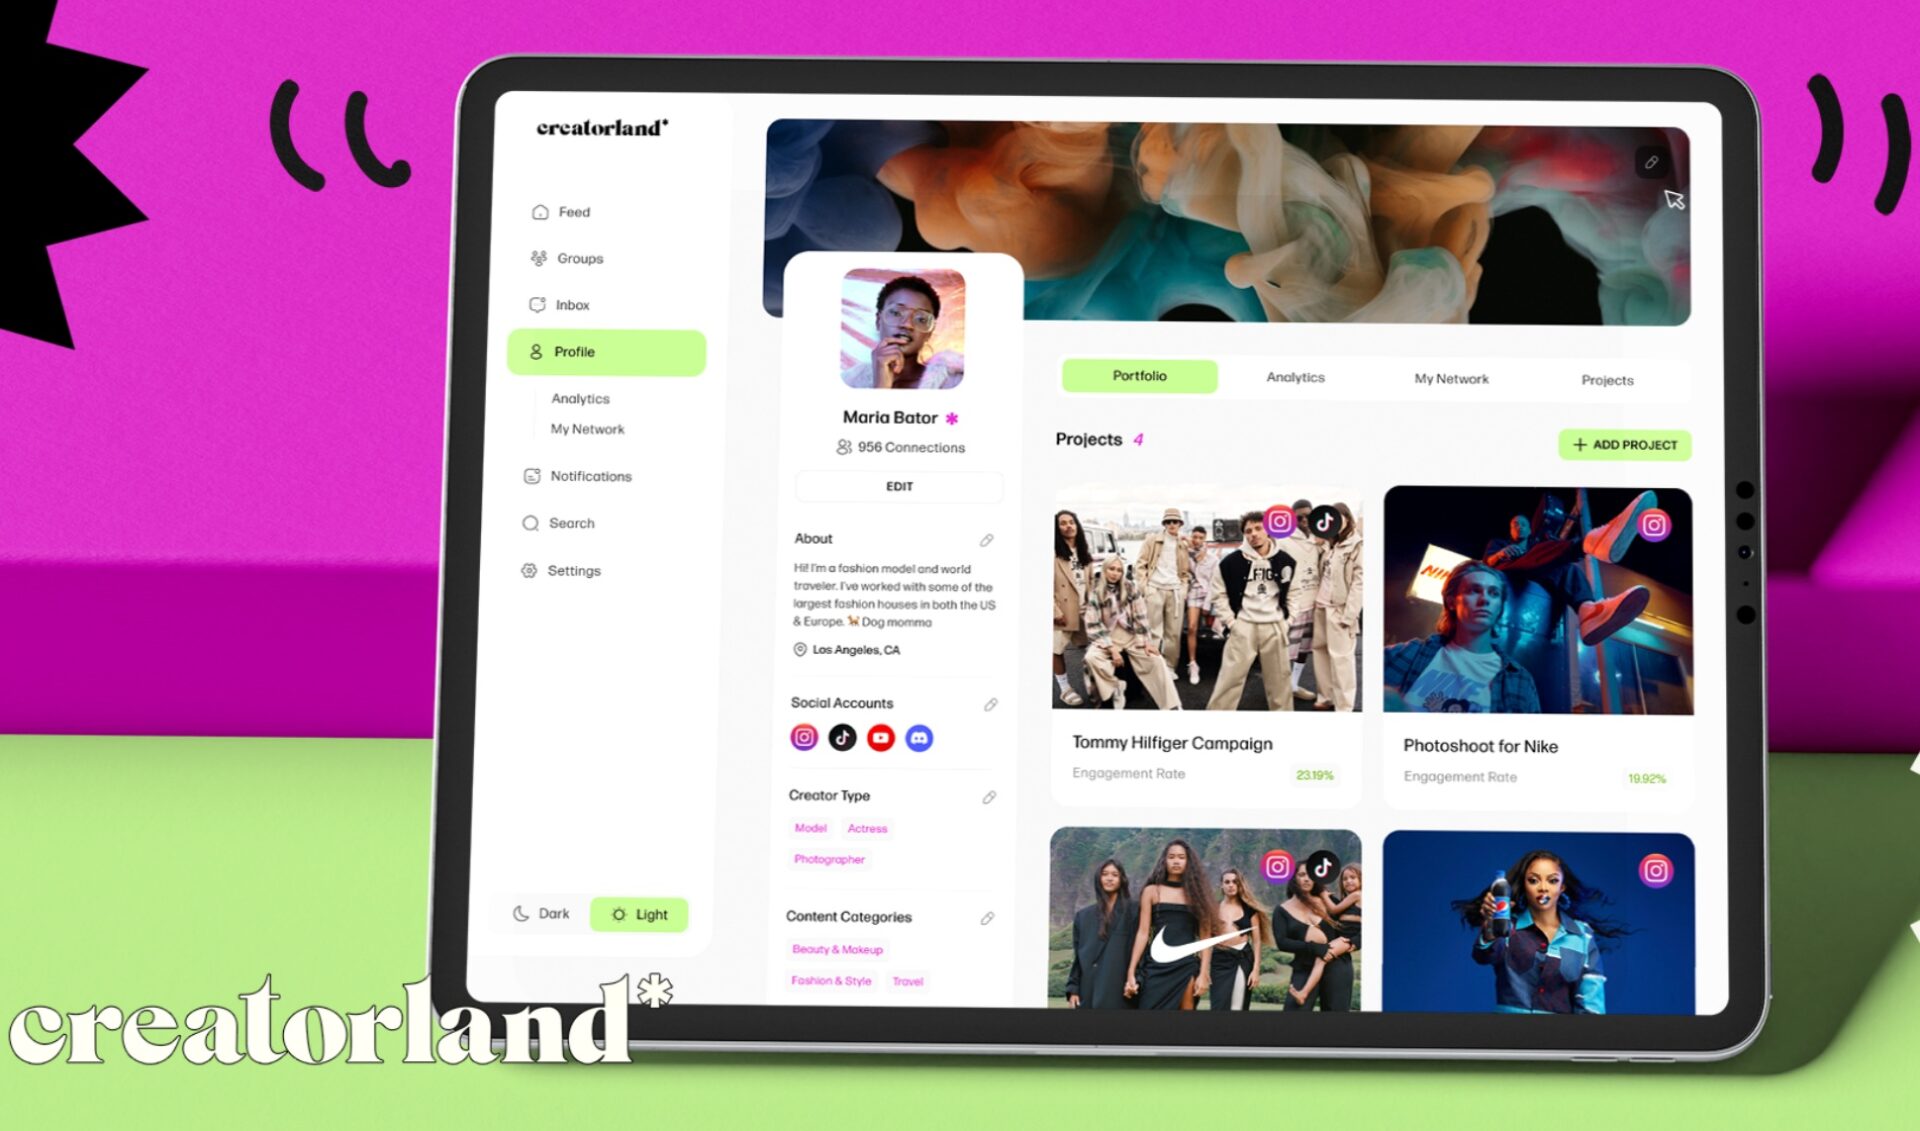 A new platform wants to be LinkedIn for influencers. Welcome to Creatorland.